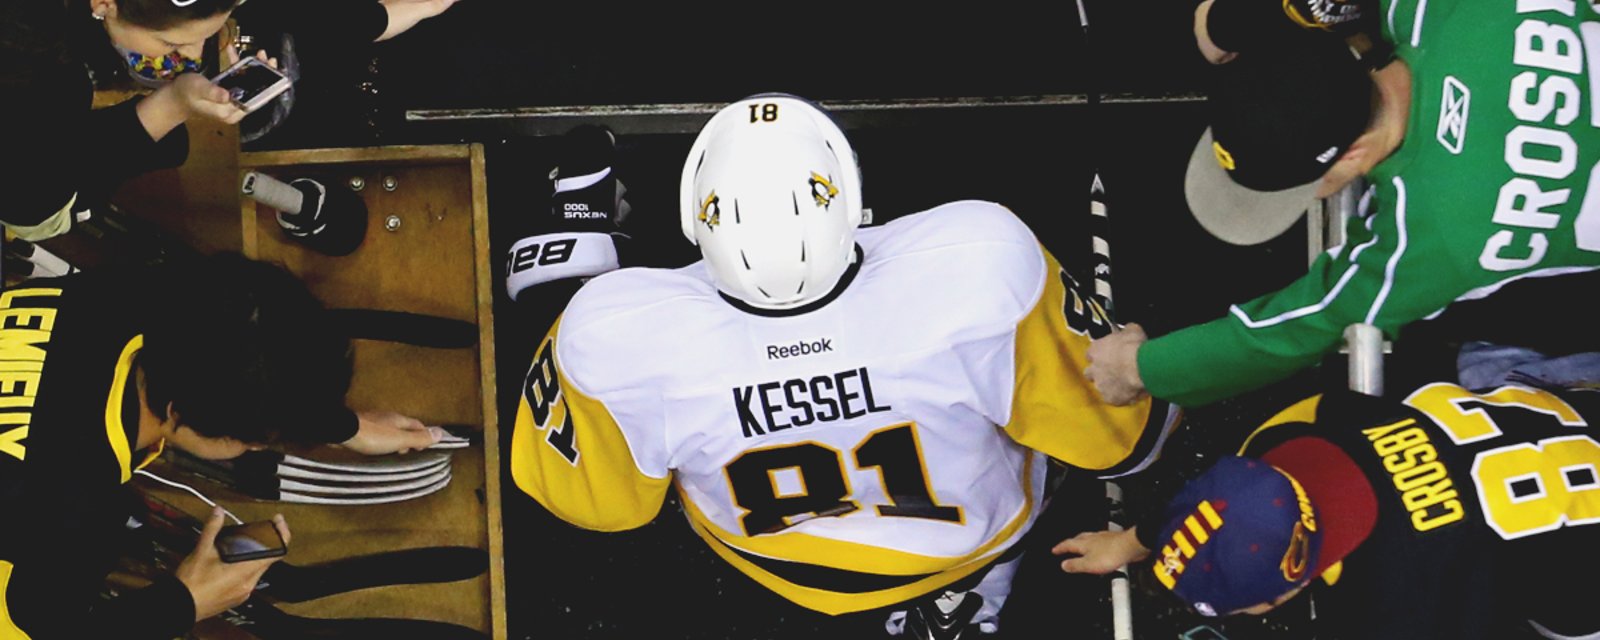 BREAKING: Phil Kessel PUBLICLY calls out Washington Capitals player, “AN IDIOT”!